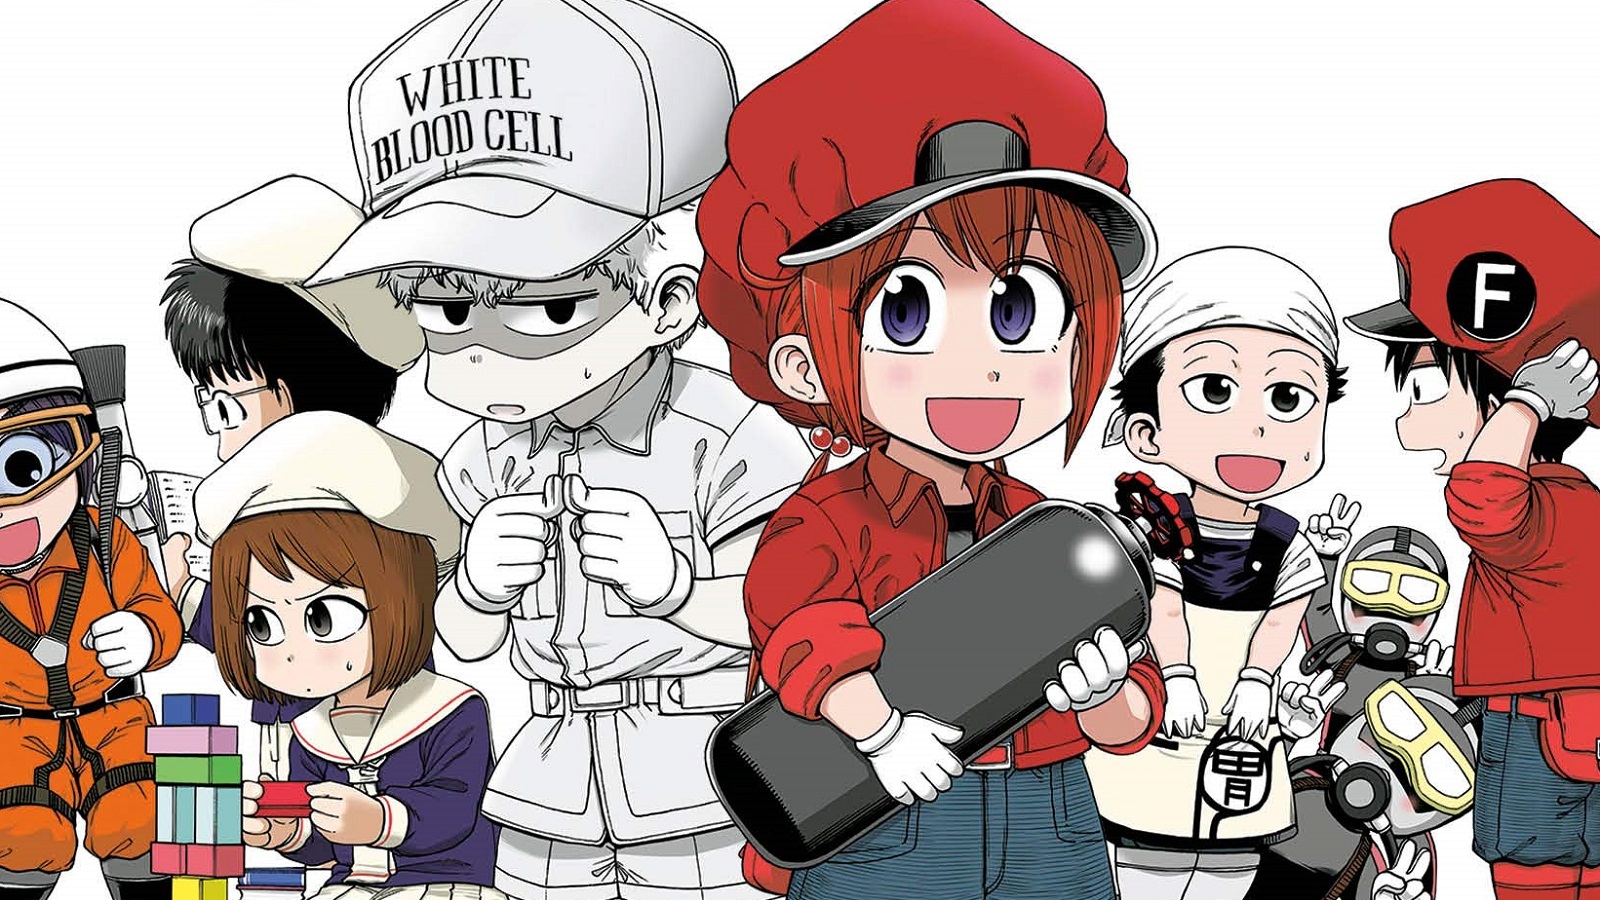 Animated Promo Video Released for “Cells at Work! Black” Manga 